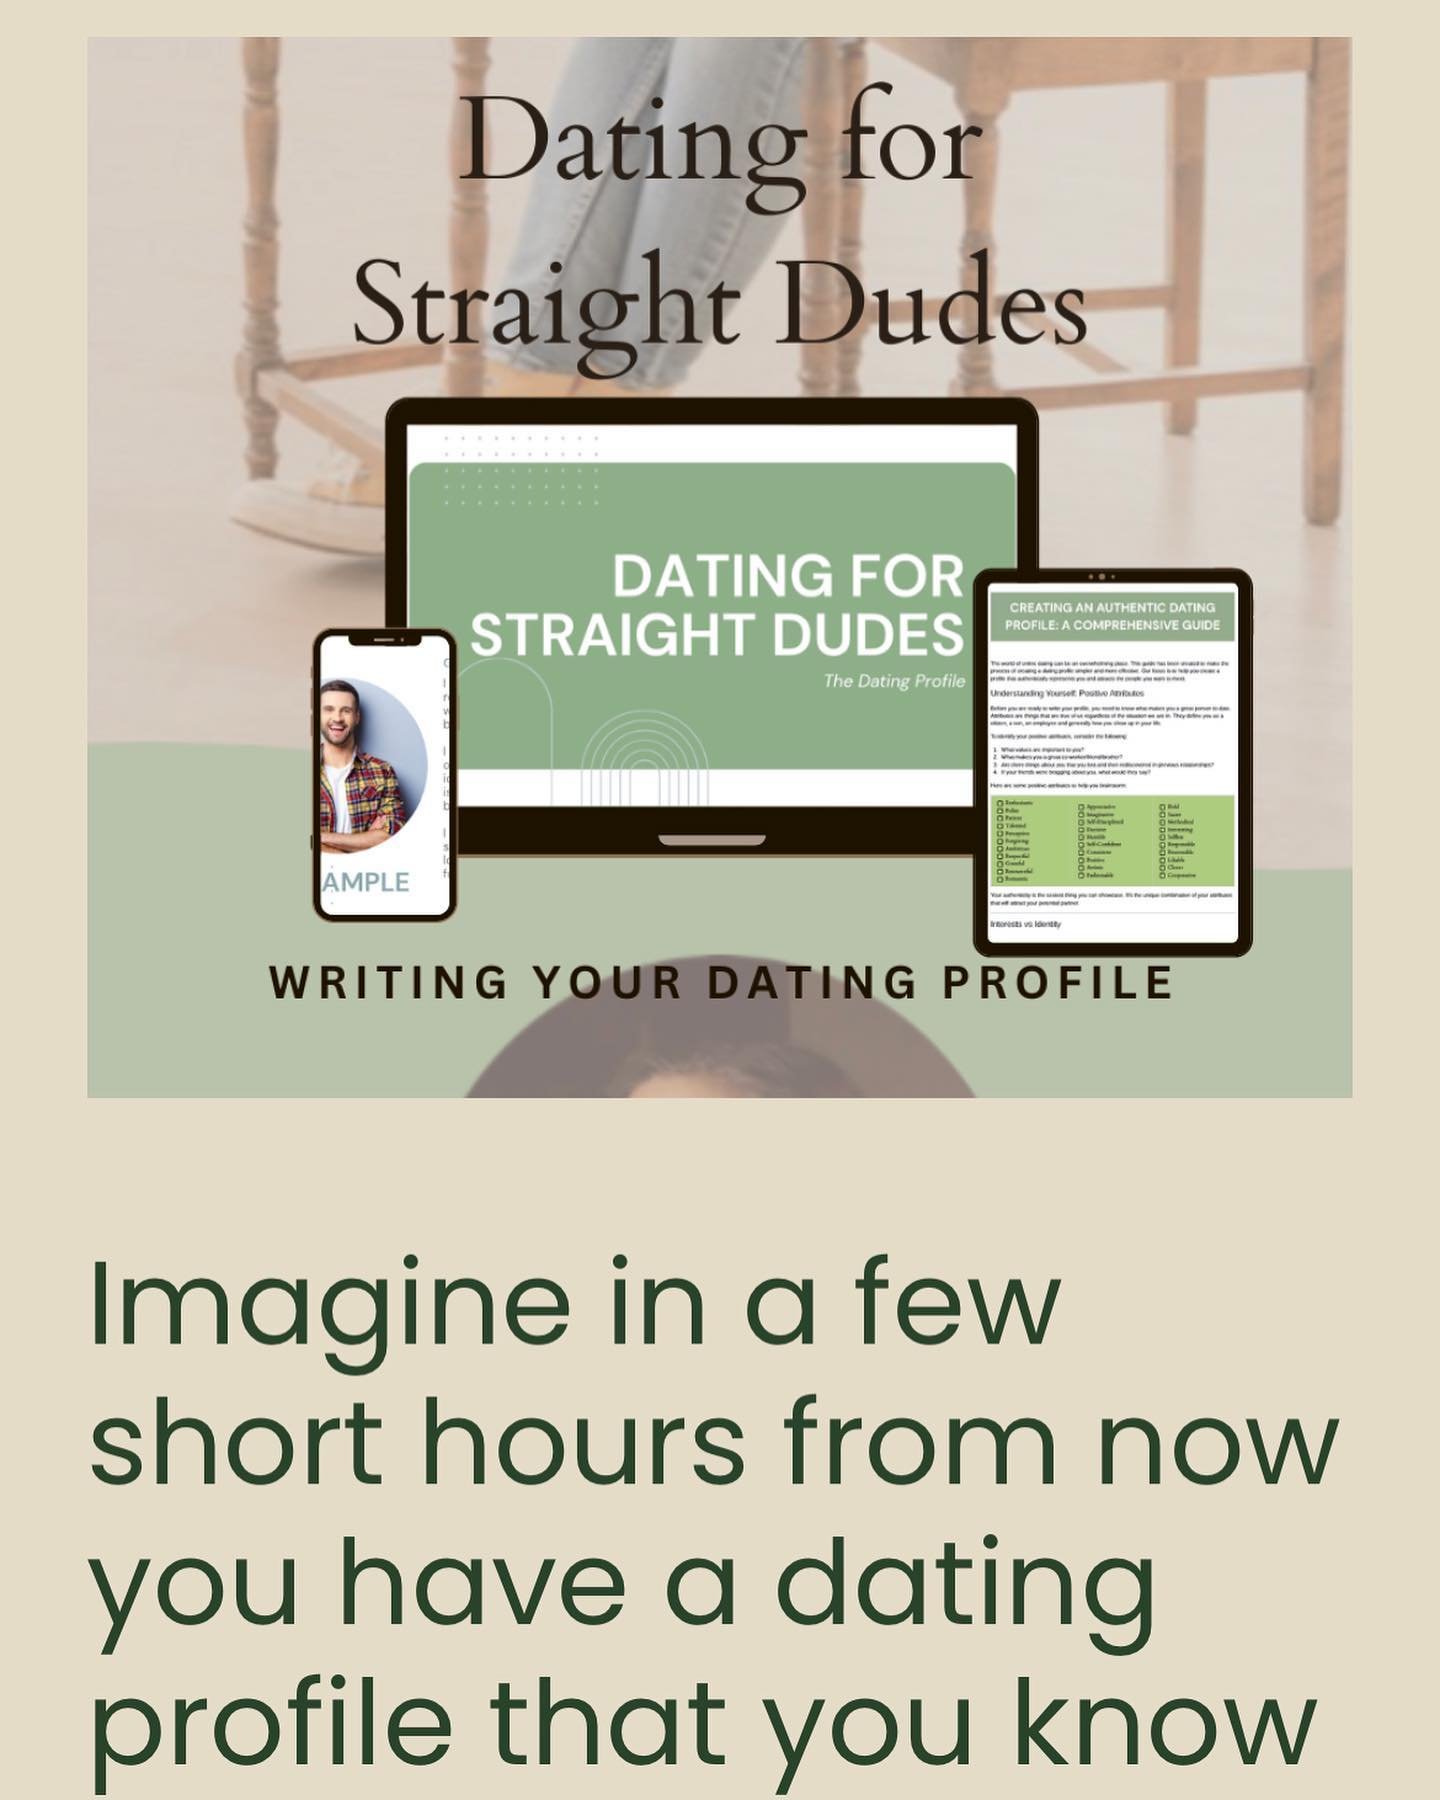 Dating for Straight Dudes: Building Your Profile goes live tomorrow! (AAANNNNDDD my new website!)

#dating #datingtipsformen #datingtips #dating101